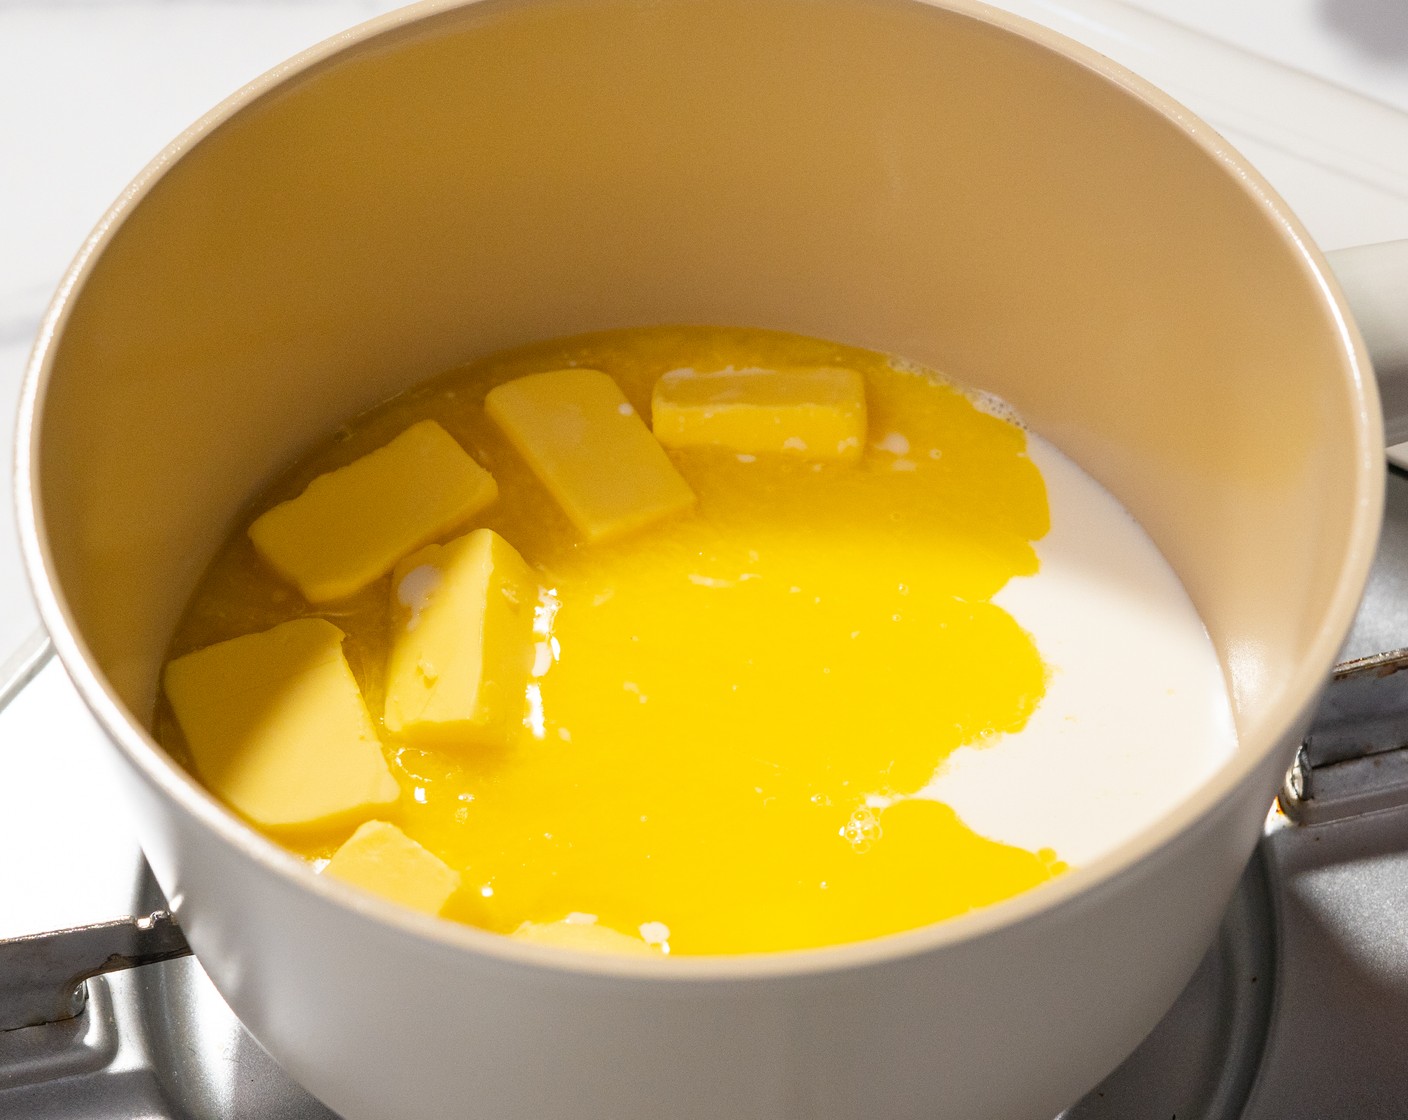 step 8 Prepare the frosting by adding Butter (1/2 cup) and Milk (1/4 cup) in a saucepan, and bringing it to a boil. Remove from heat.